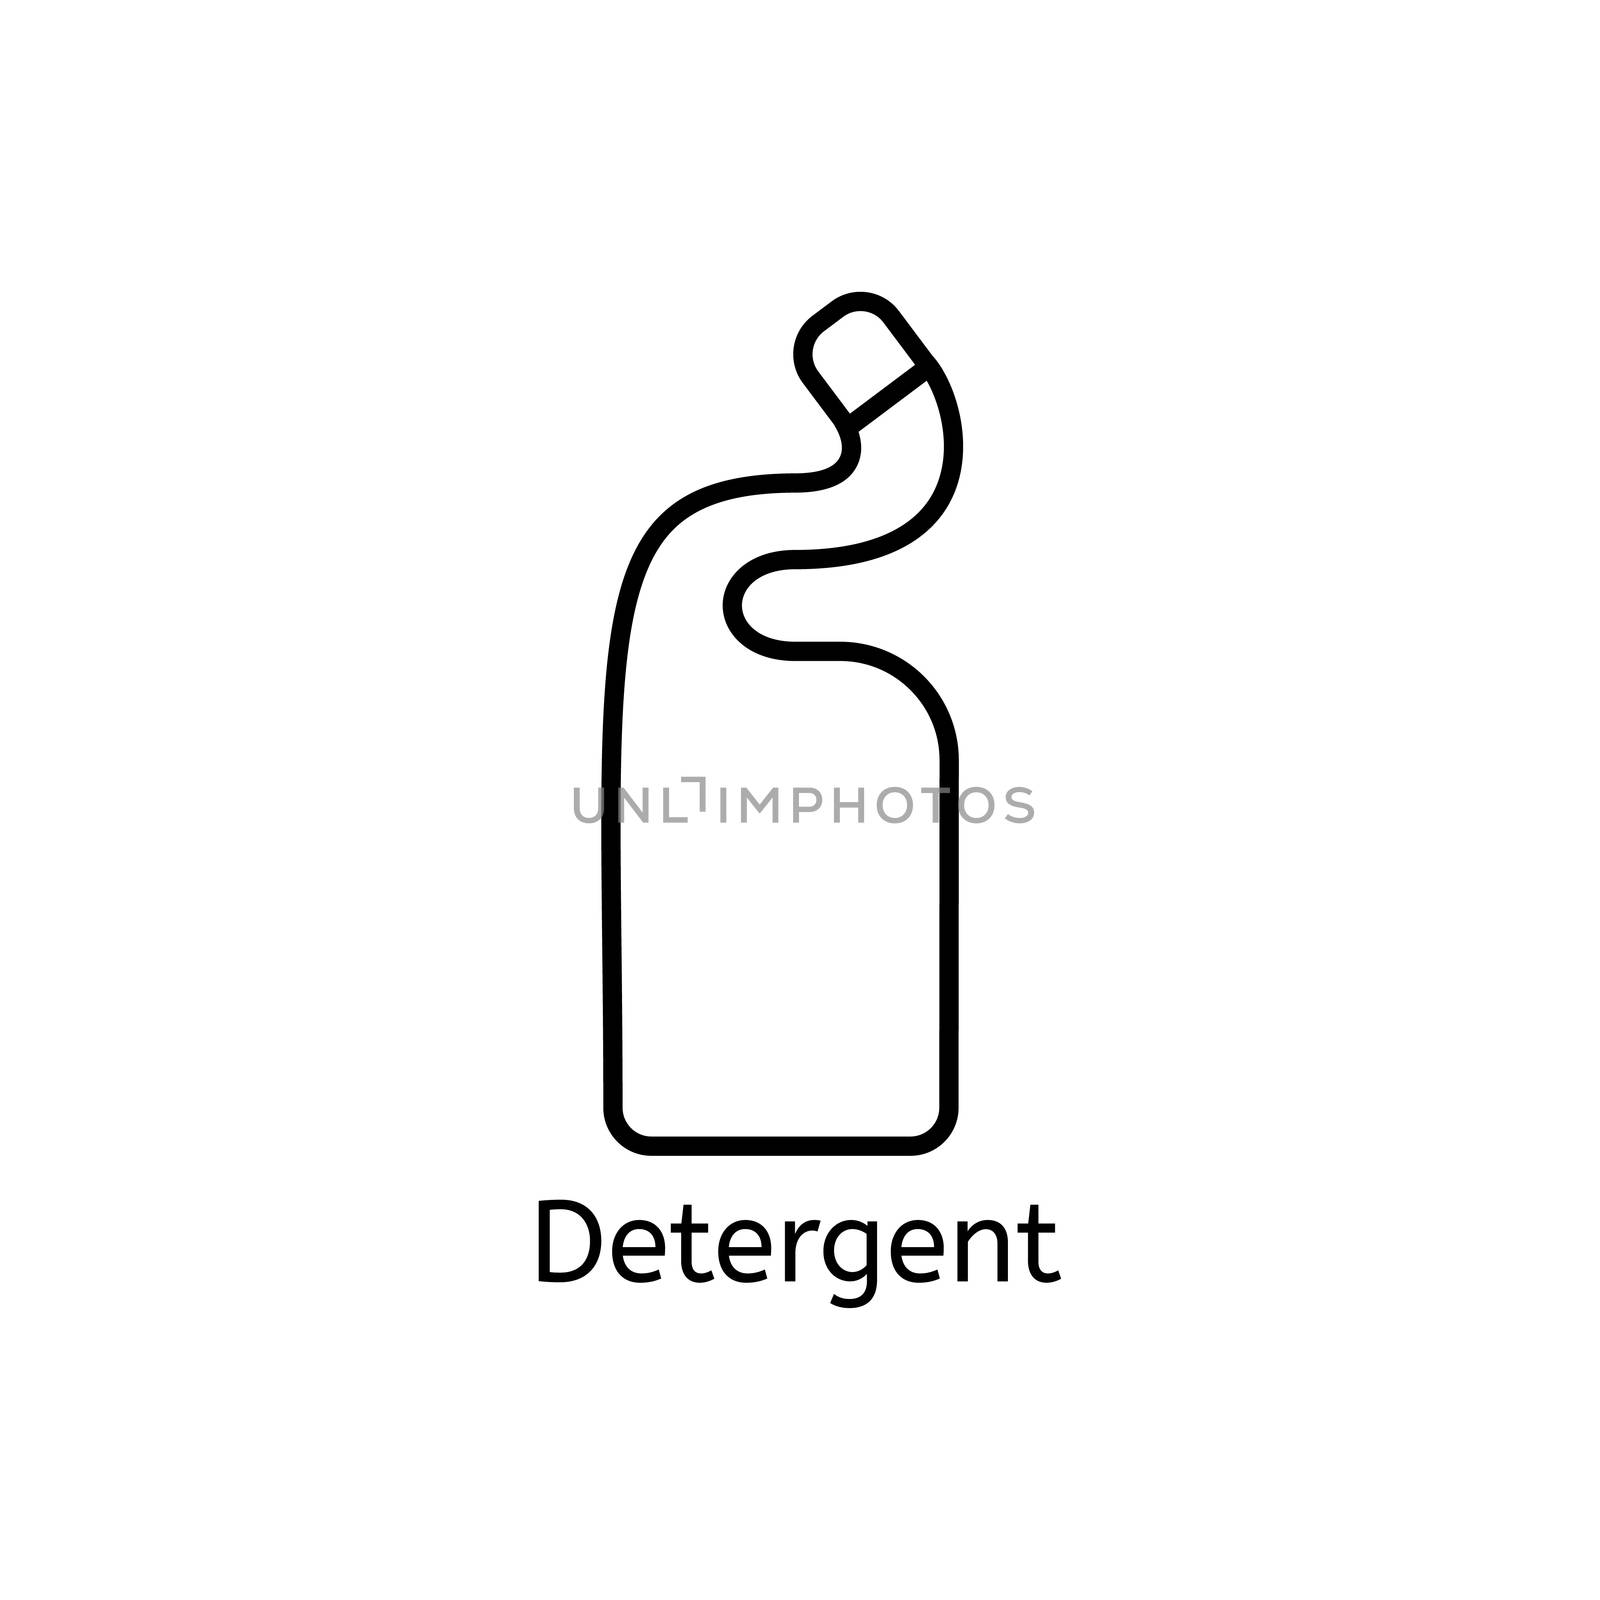 Detergents simple line icon. Liquid detergent thin linear signs. Means for cleaning simple concept for websites, infographic, mobile applications. by Elena_Garder